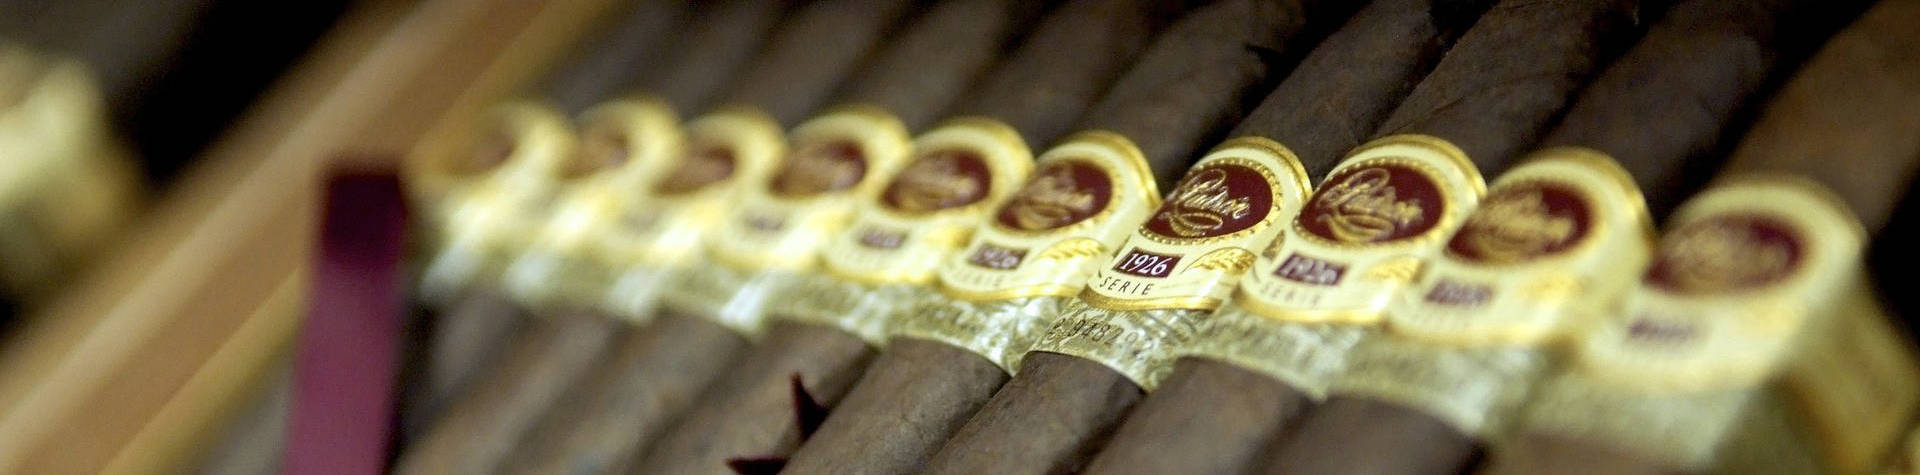 You deserve the finer things in life. Enjoy our selection of premium cigars.